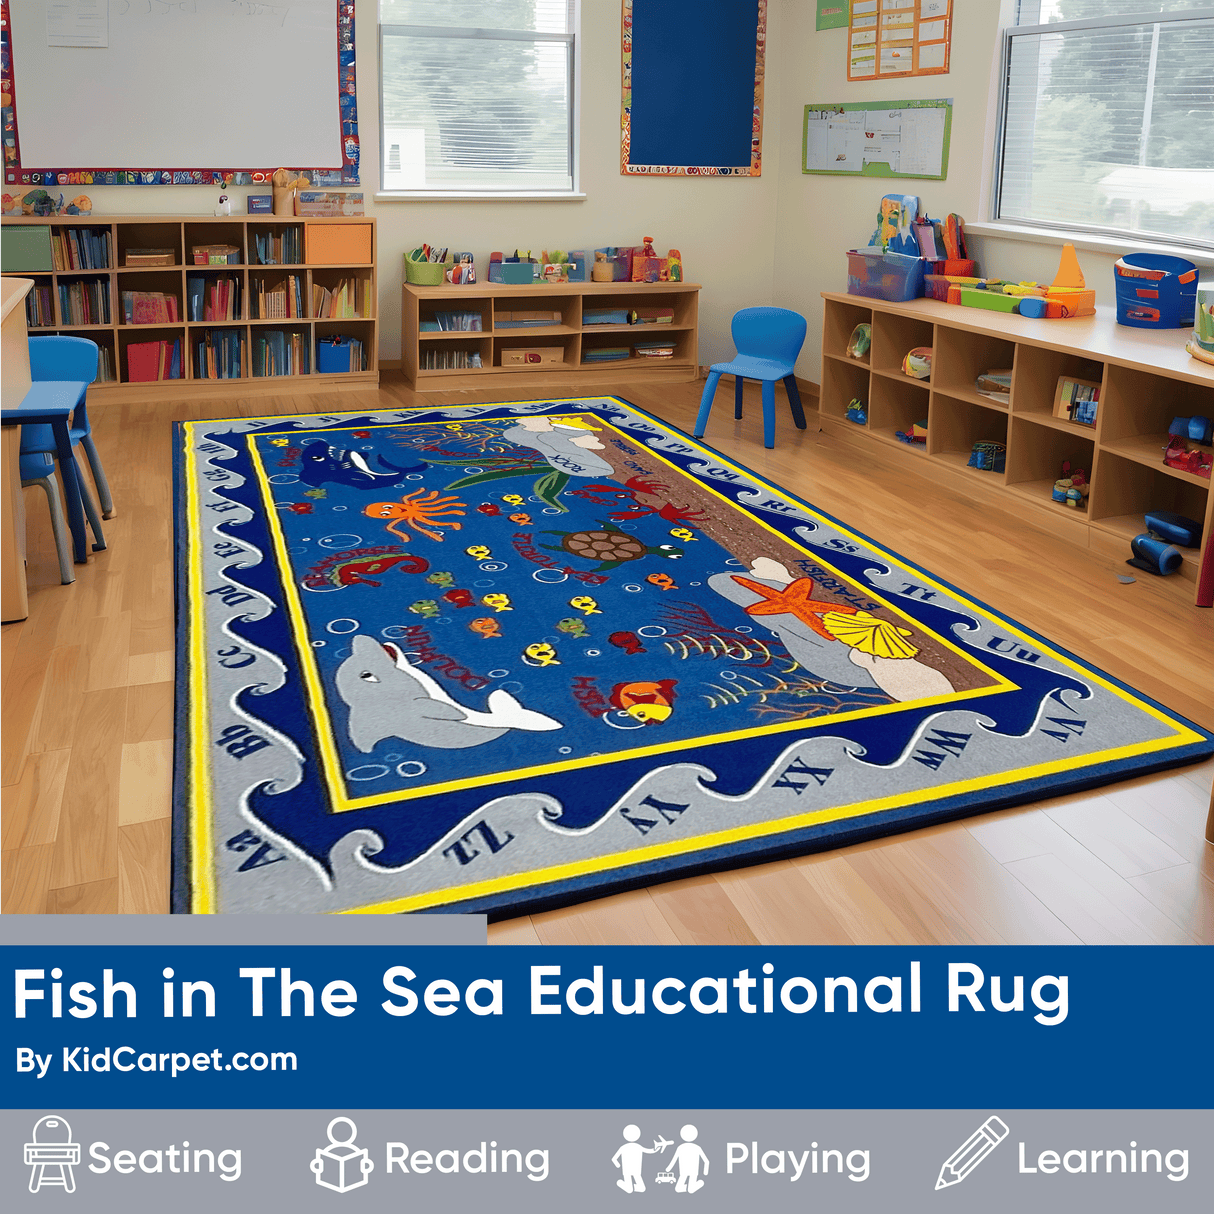 Fish in the Sea Rug